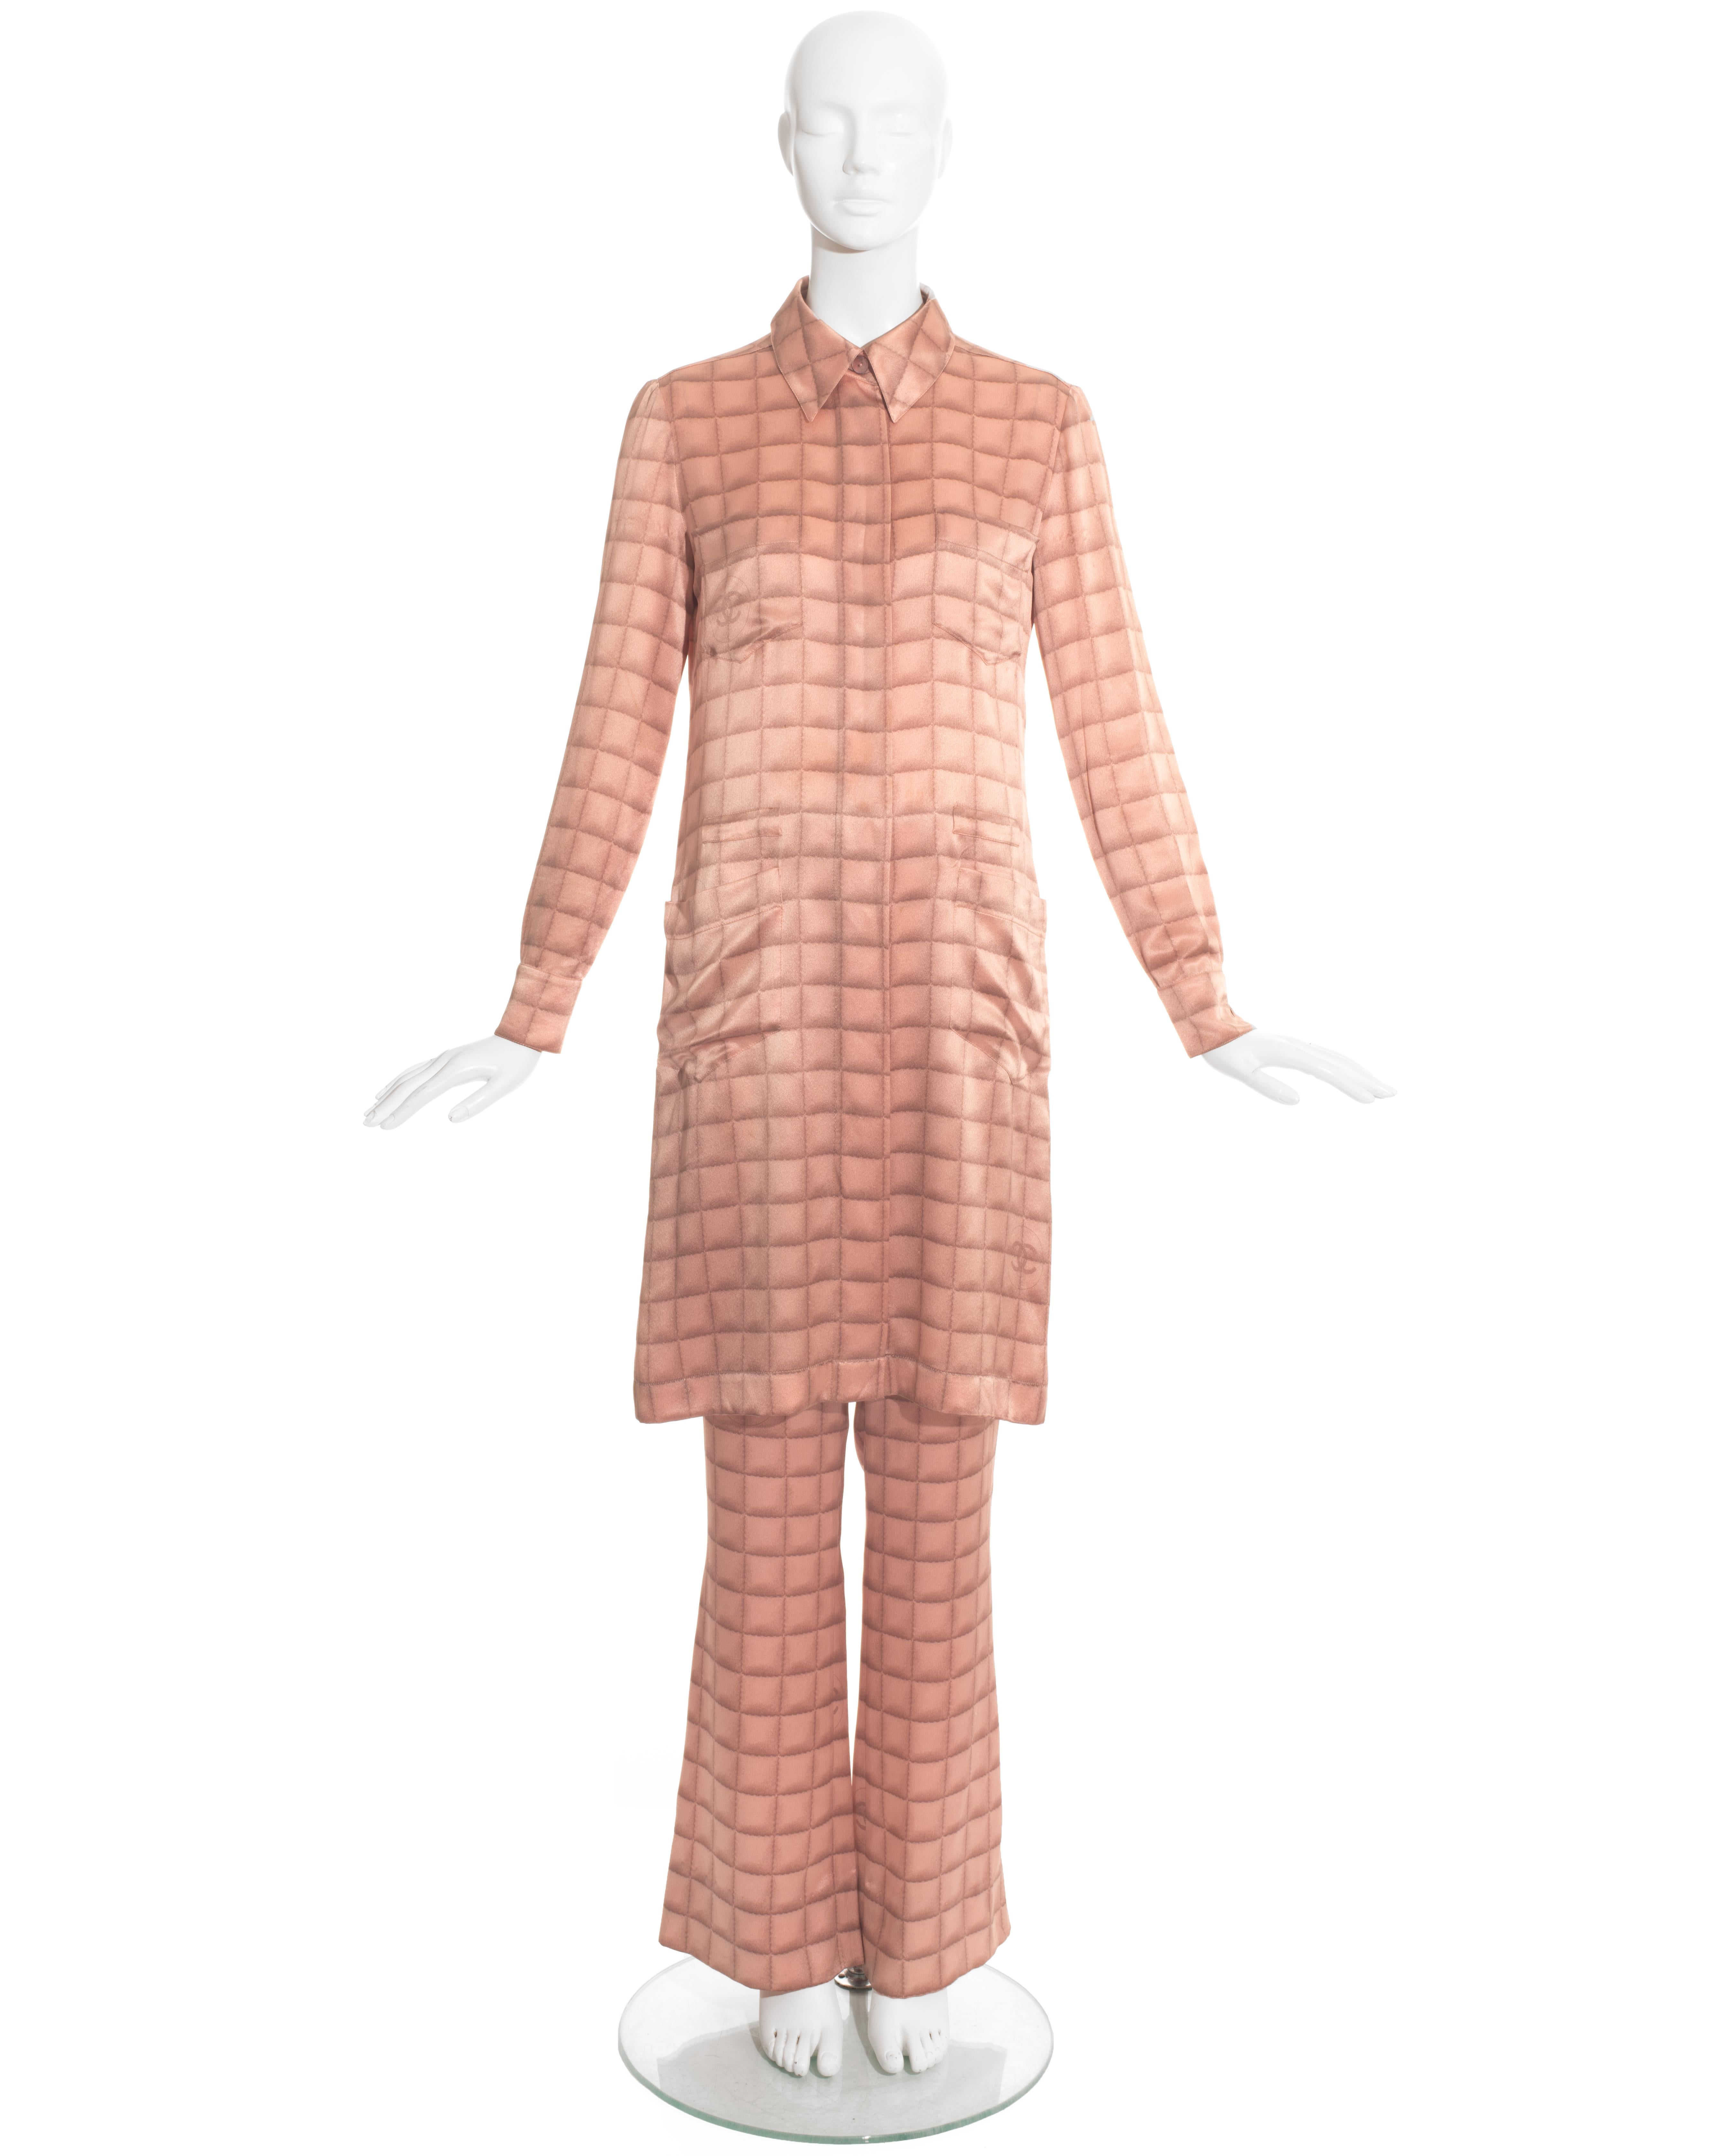 Chanel by Karl Lagerfeld; pink silk with trompe-l'oeil quilt print pant suit comprising: three-quarter length button-up blouse/dress with four open pockets, matching bell bottom pants with zip fastening and silver 'cc' on hip.

Fall-Winter 2000